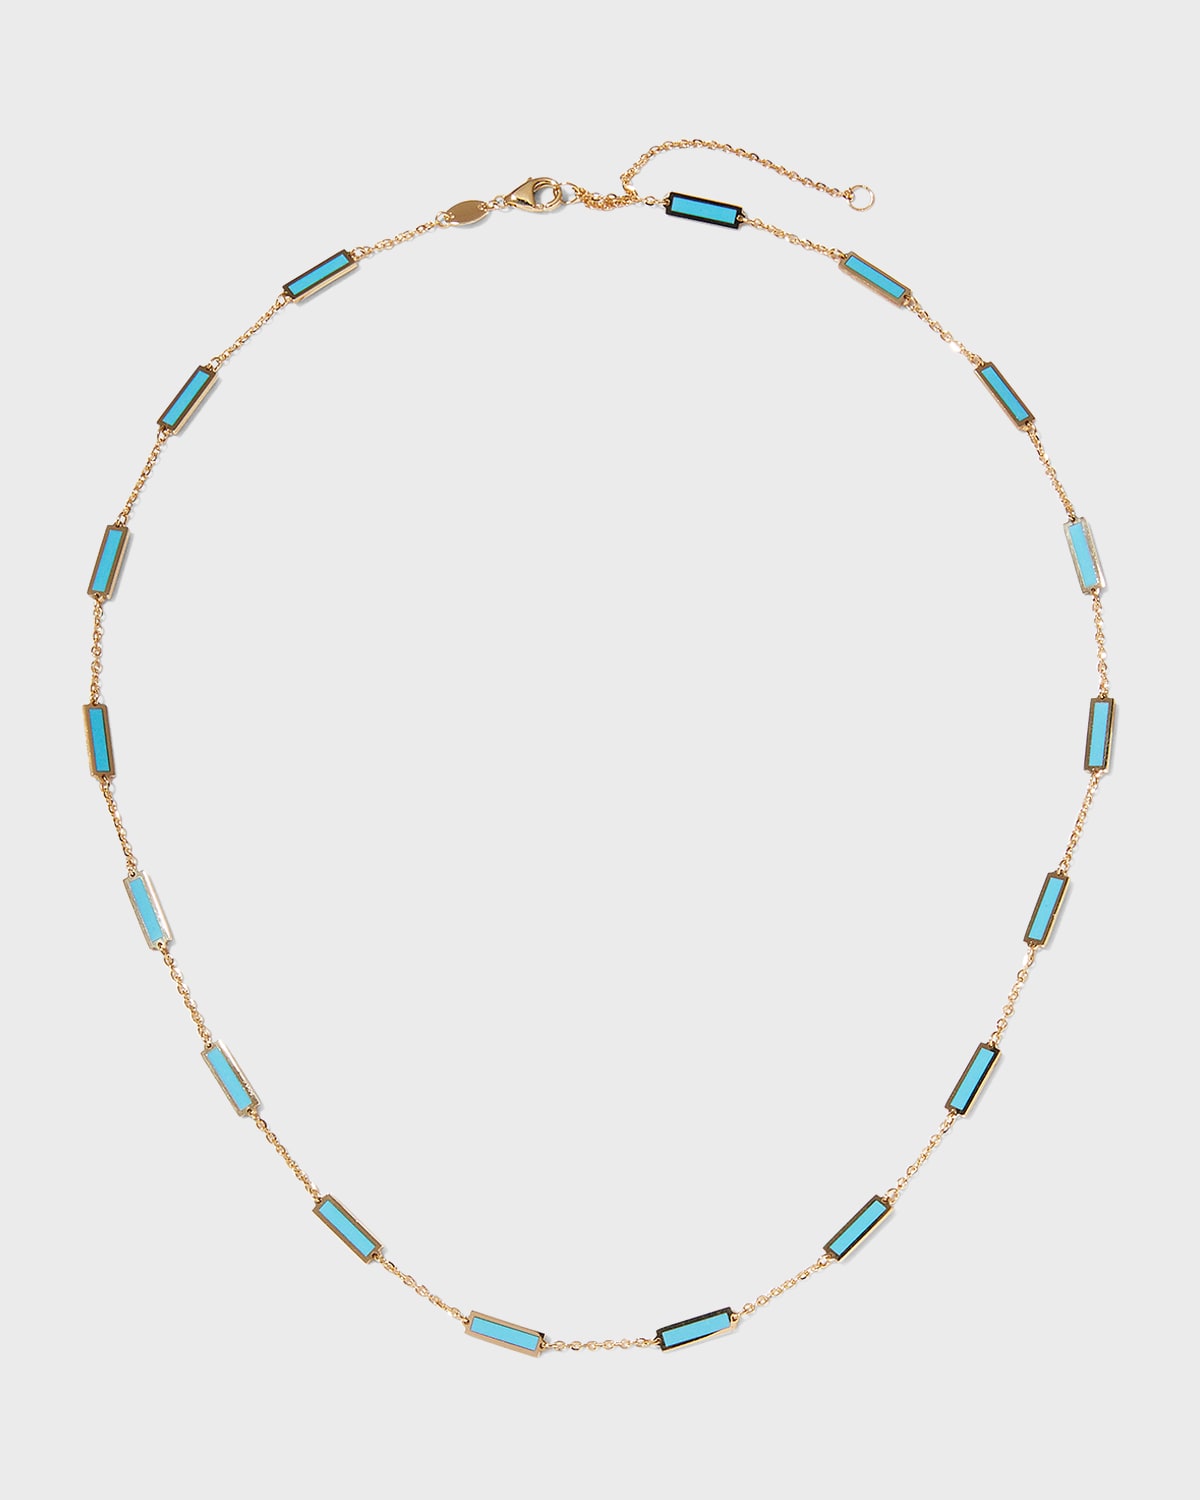 Frederic Sage Yellow Gold 17-Stations Turquoise Necklace